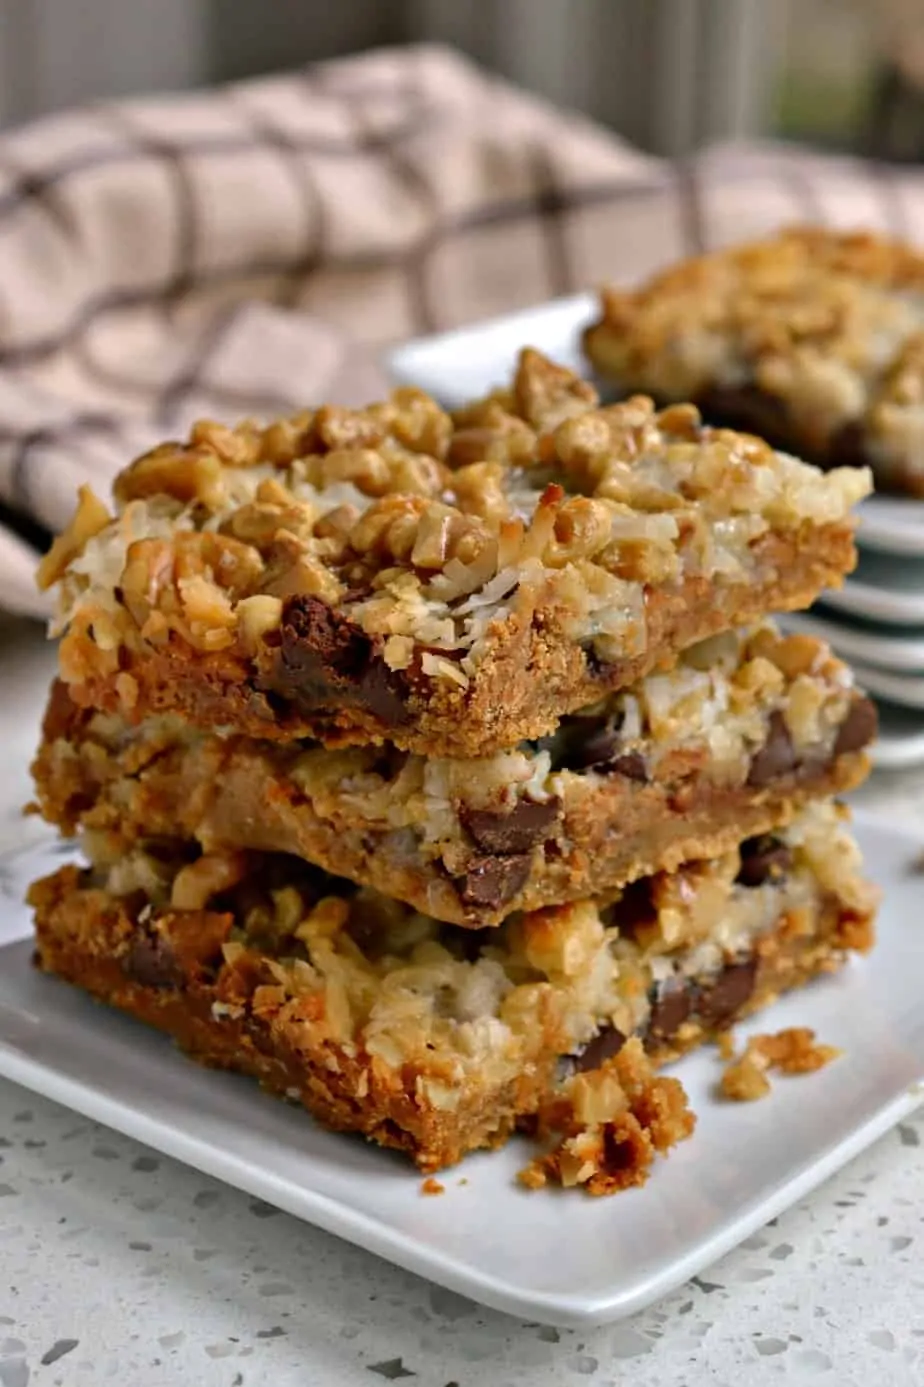 Scrumptious Magic Cookie Bars are loaded with chocolate chips, peanut butter chips, coconut, and walnuts.  